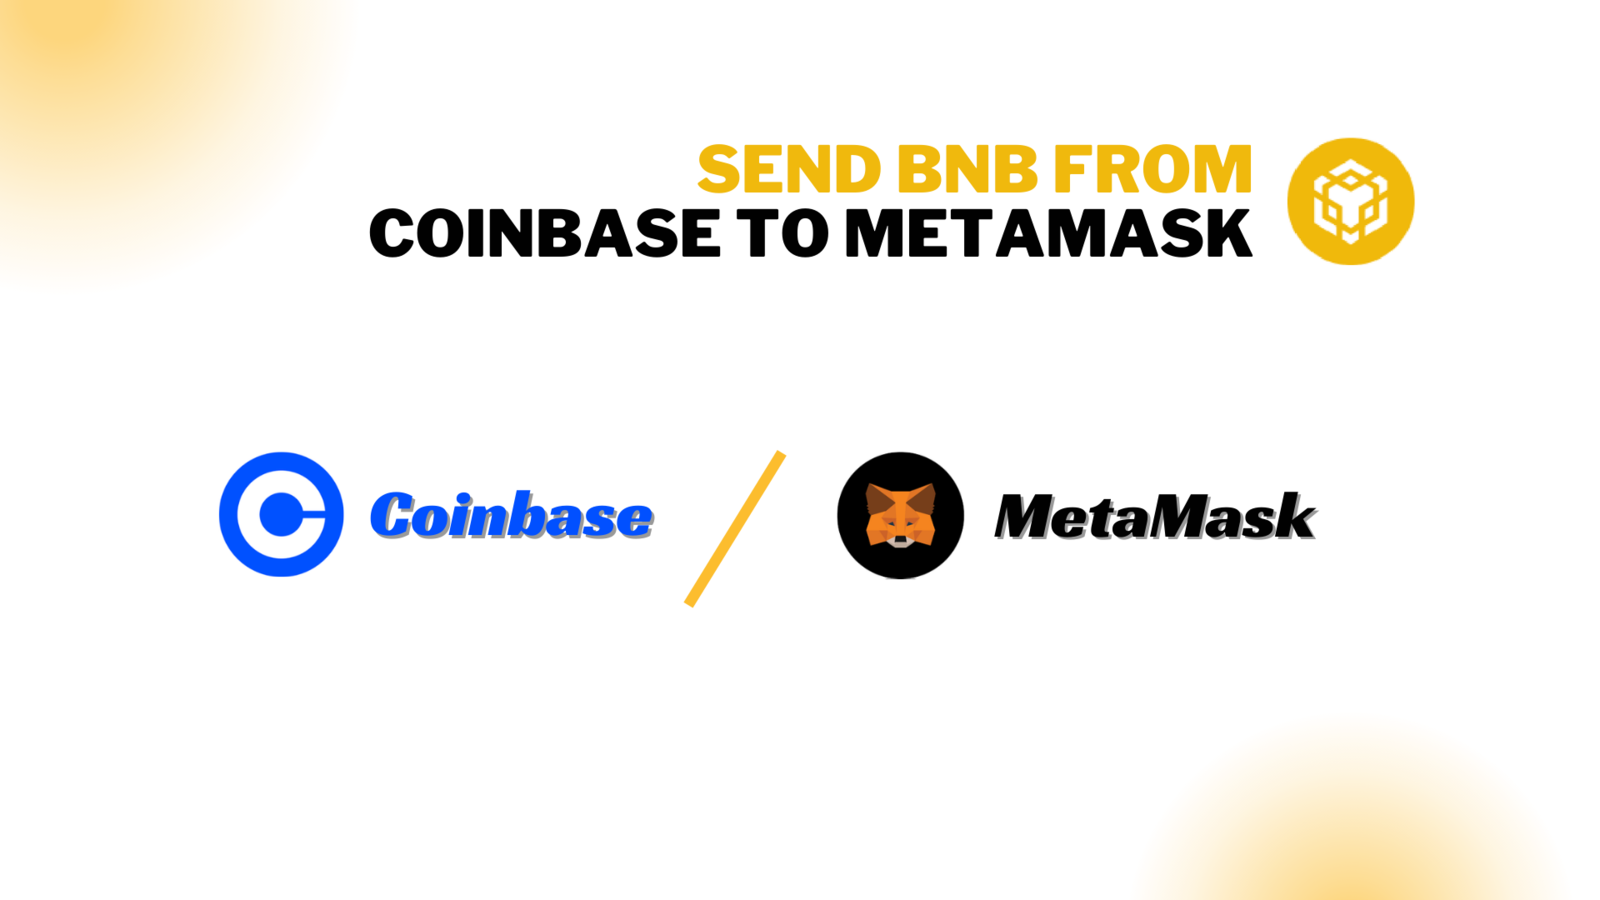 How to send BNB from Coinbase to MetaMask? - Find Bitcoin ATM Near You